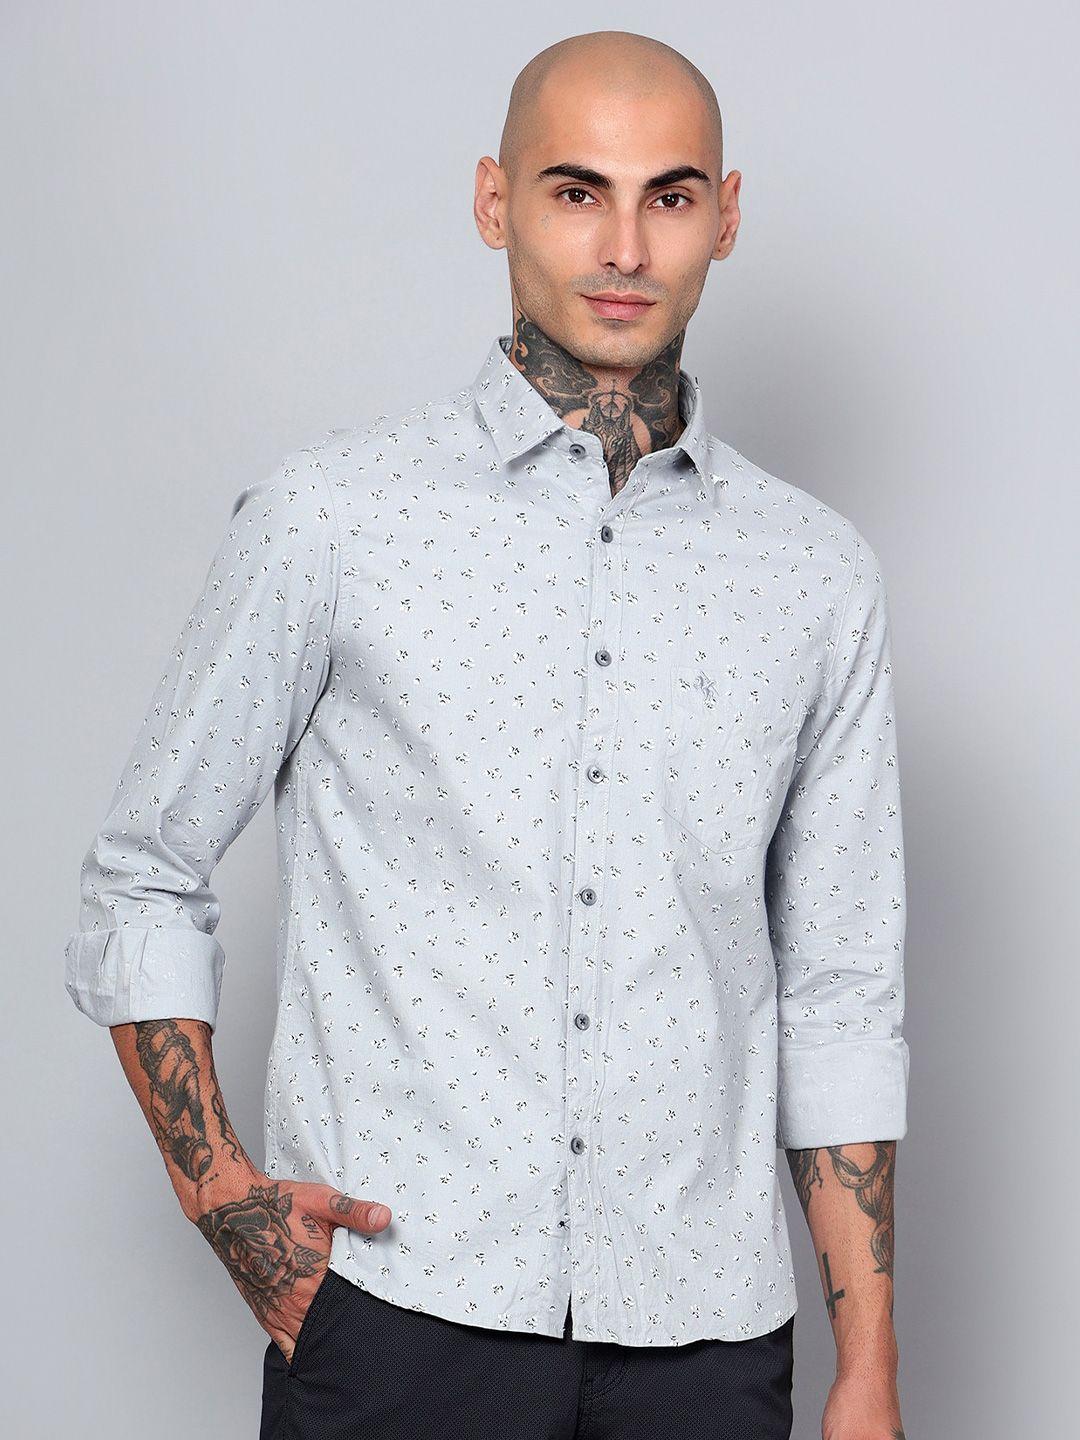 cantabil comfort floral opaque printed cotton casual shirt